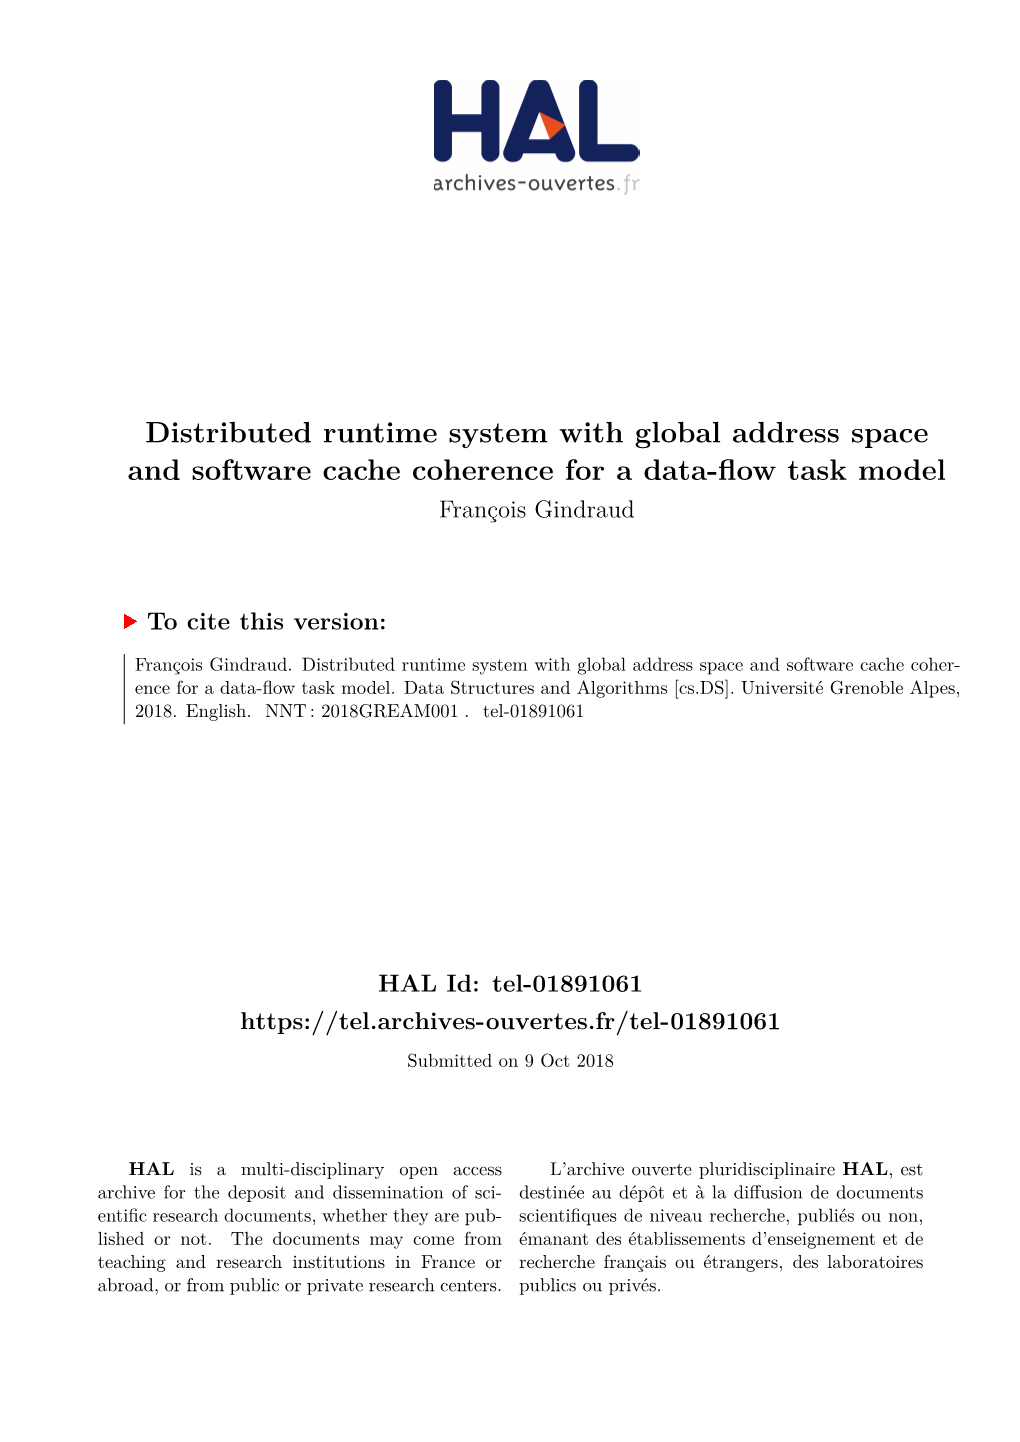 Distributed Runtime System with Global Address Space and Software Cache Coherence for a Data-Flow Task Model François Gindraud